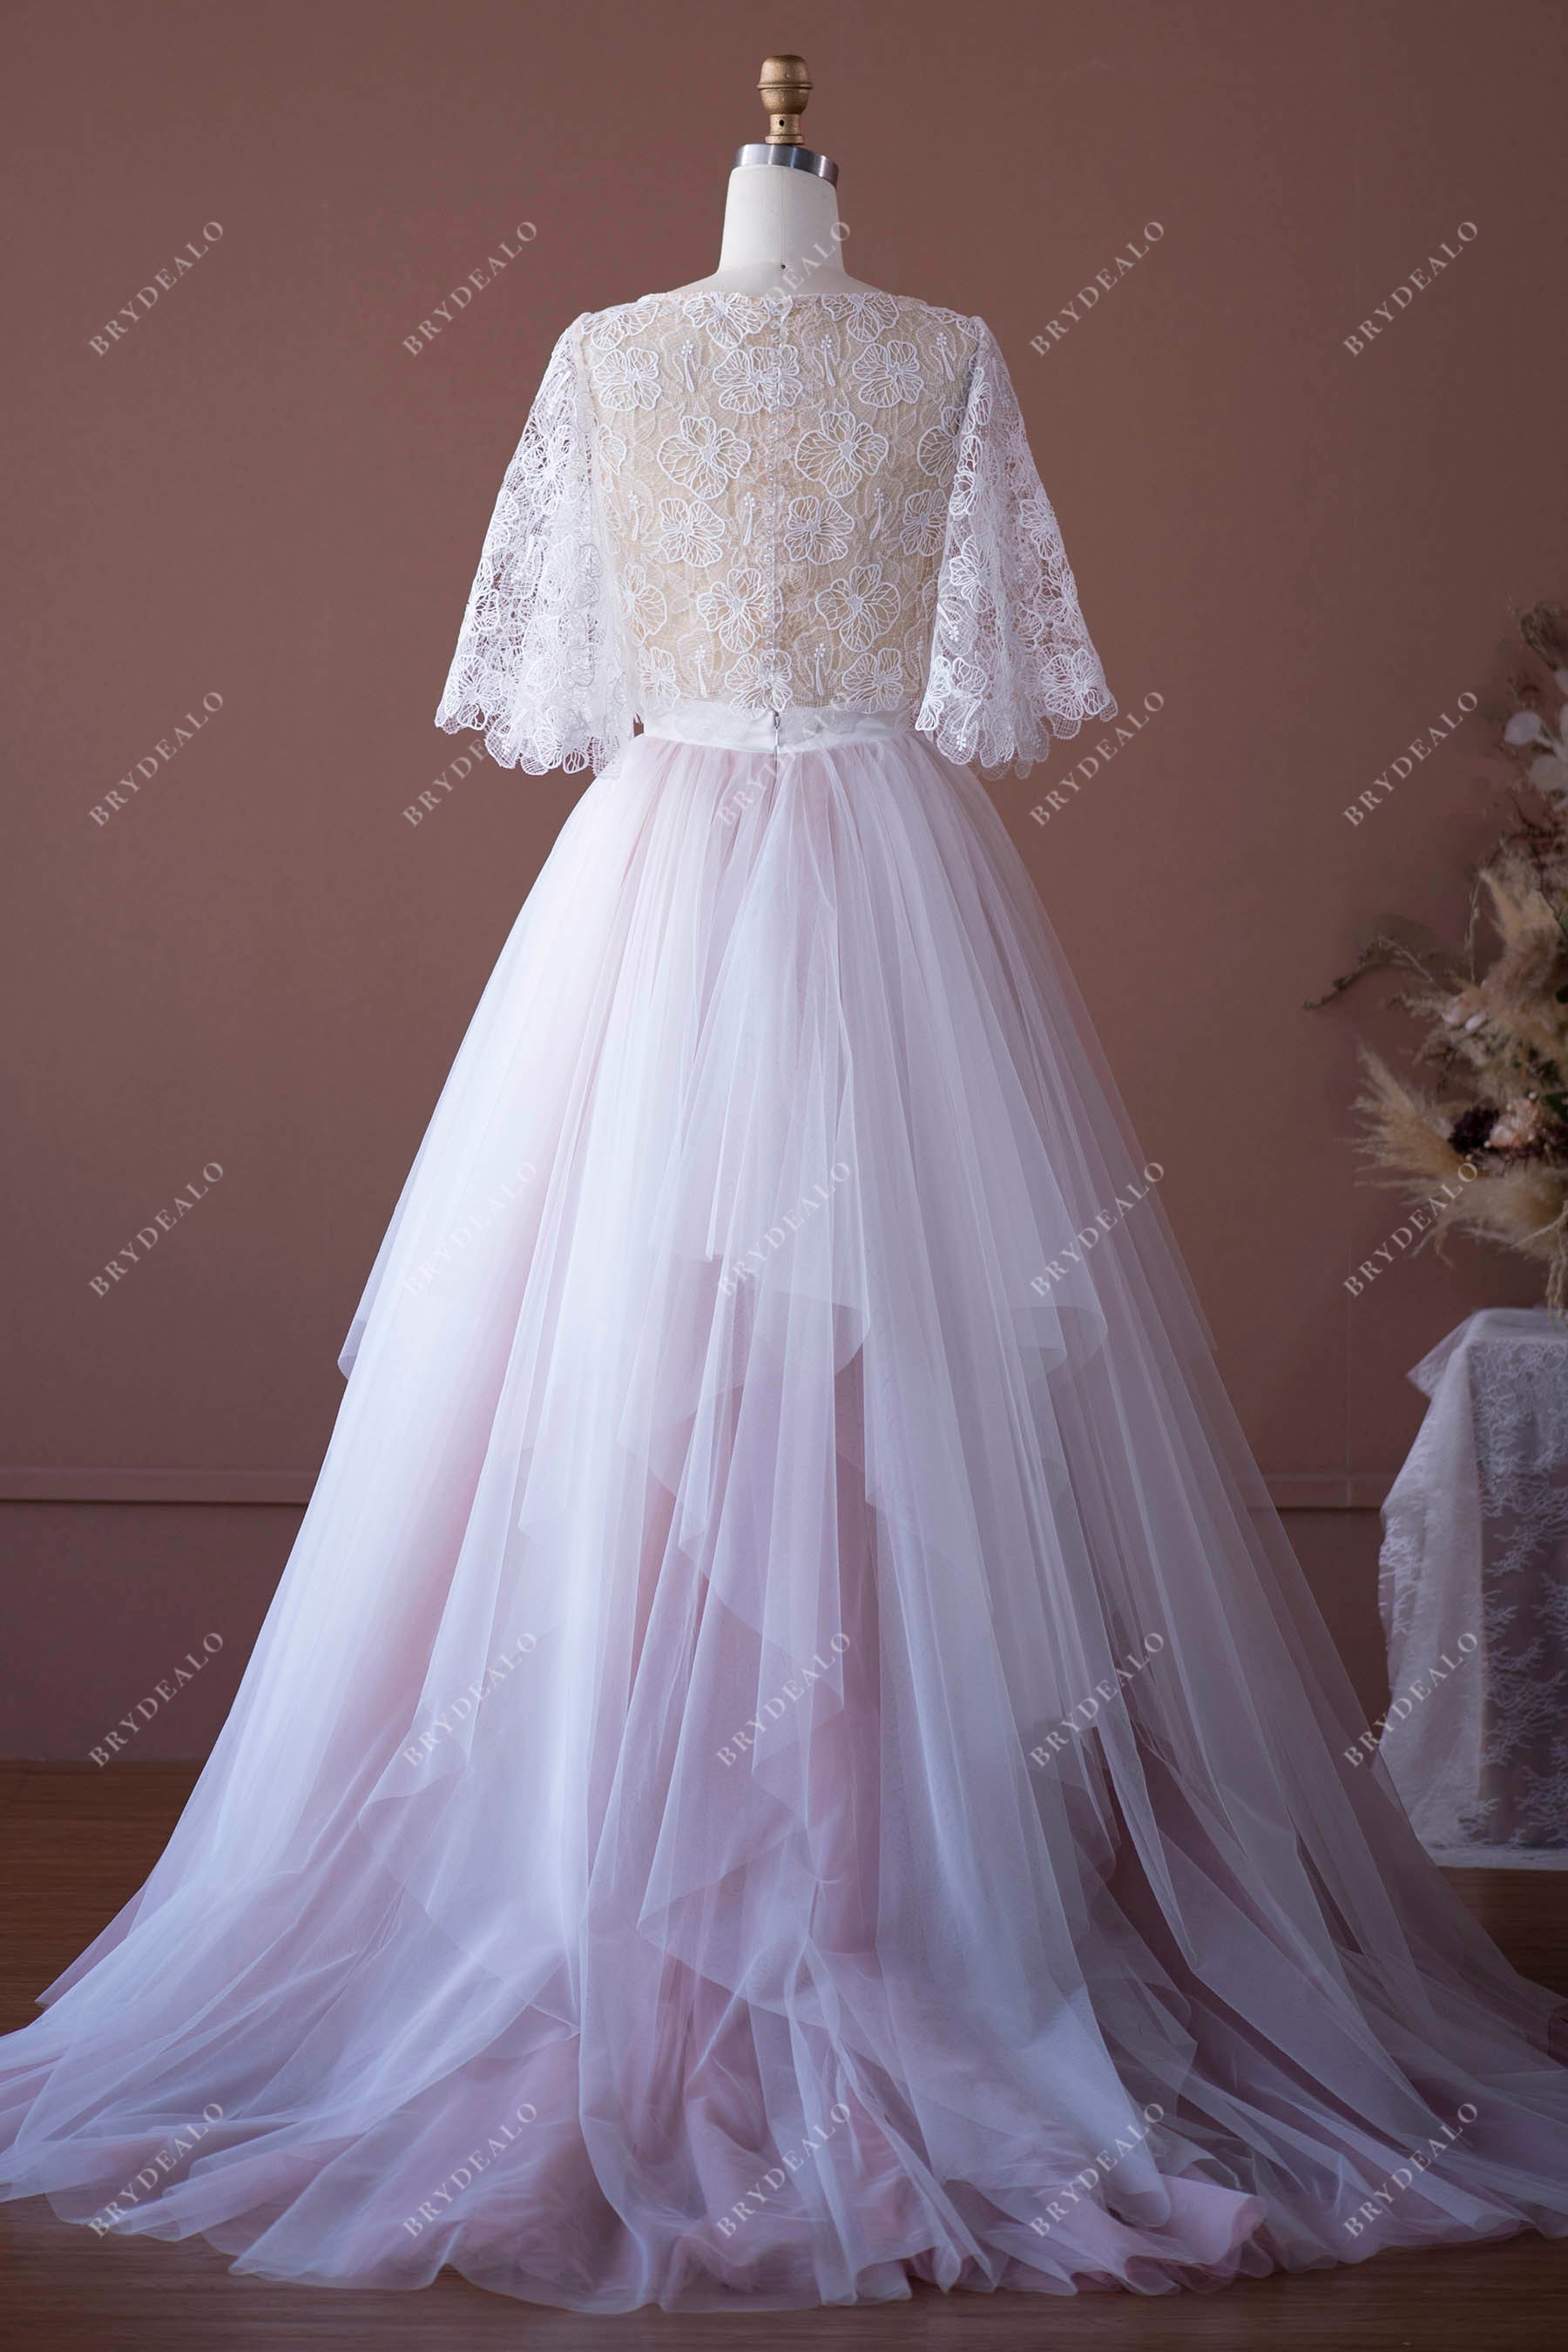 flutter sleeves lace informal puffy A-line wedding ball gown